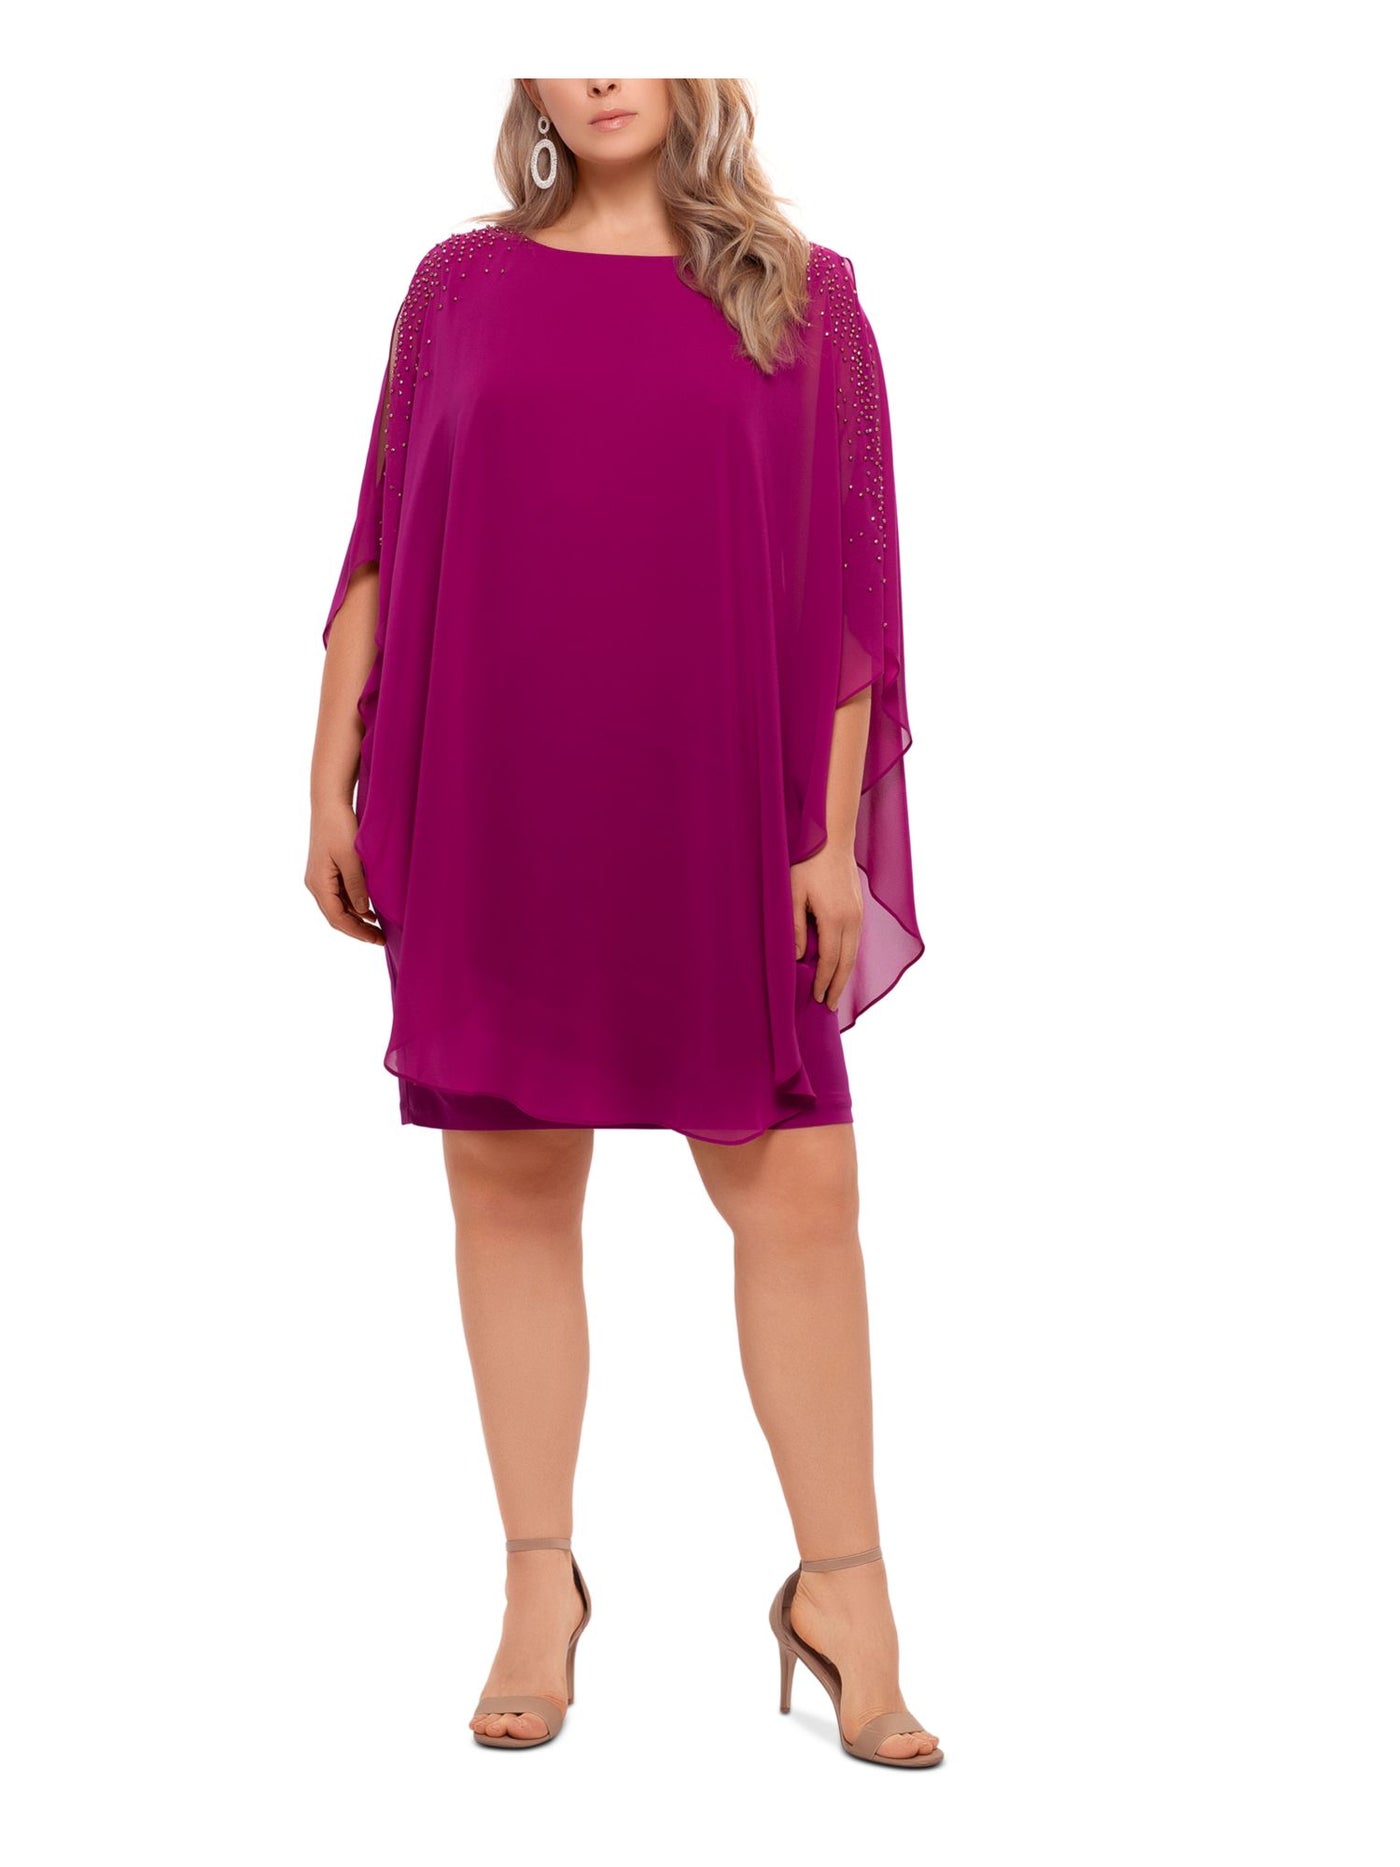 X BY XSCAPE Womens Stretch Cold Shoulder Chiffon Overlay Elbow Sleeve Boat Neck Above The Knee Evening Shift Dress